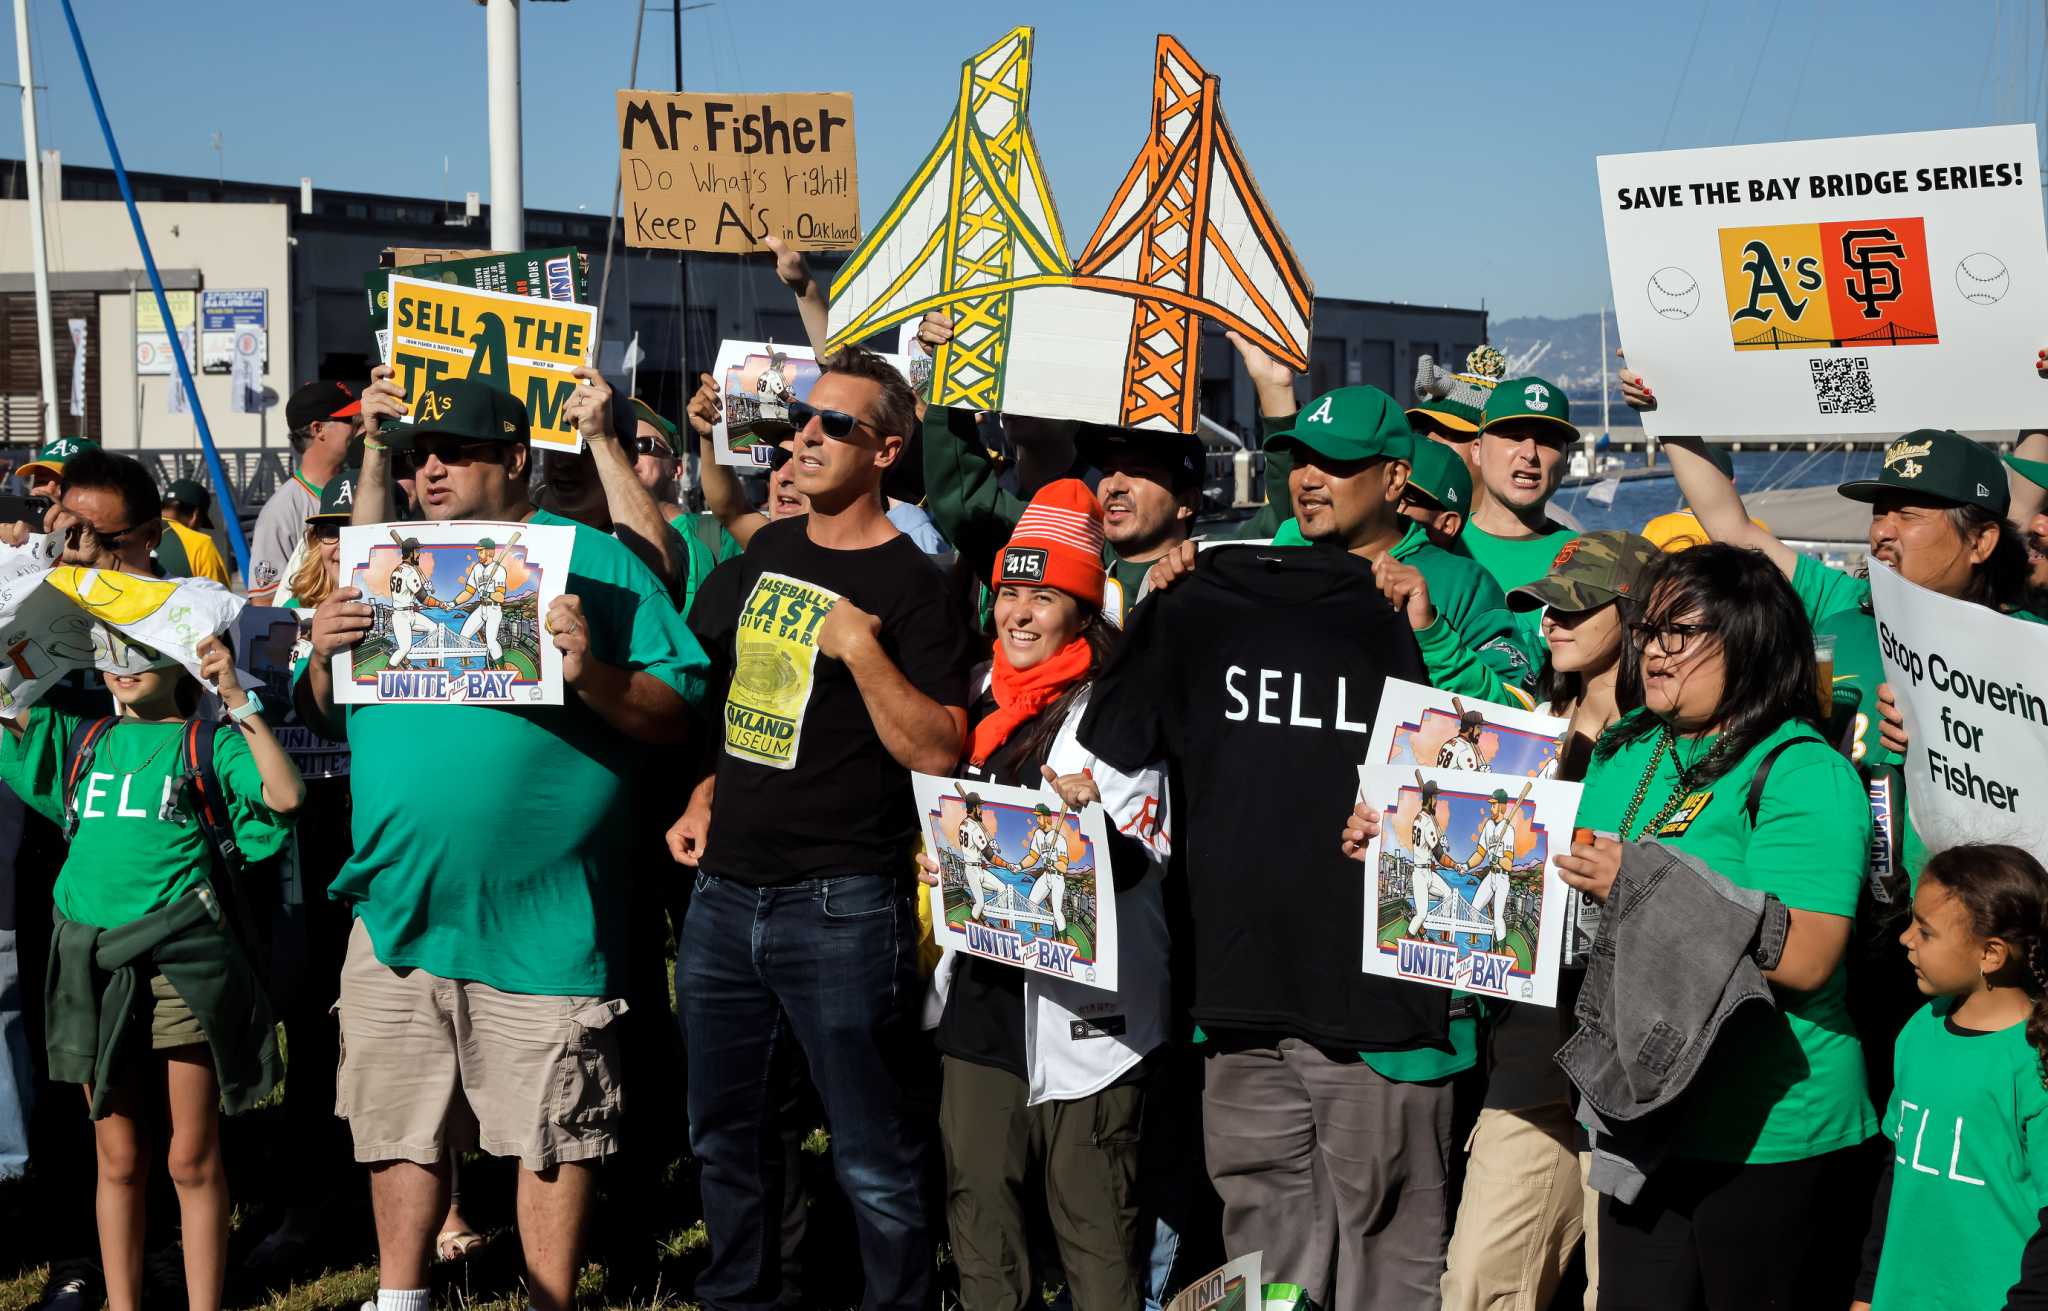 Oakland A's fans come together in community protest: 'It means so